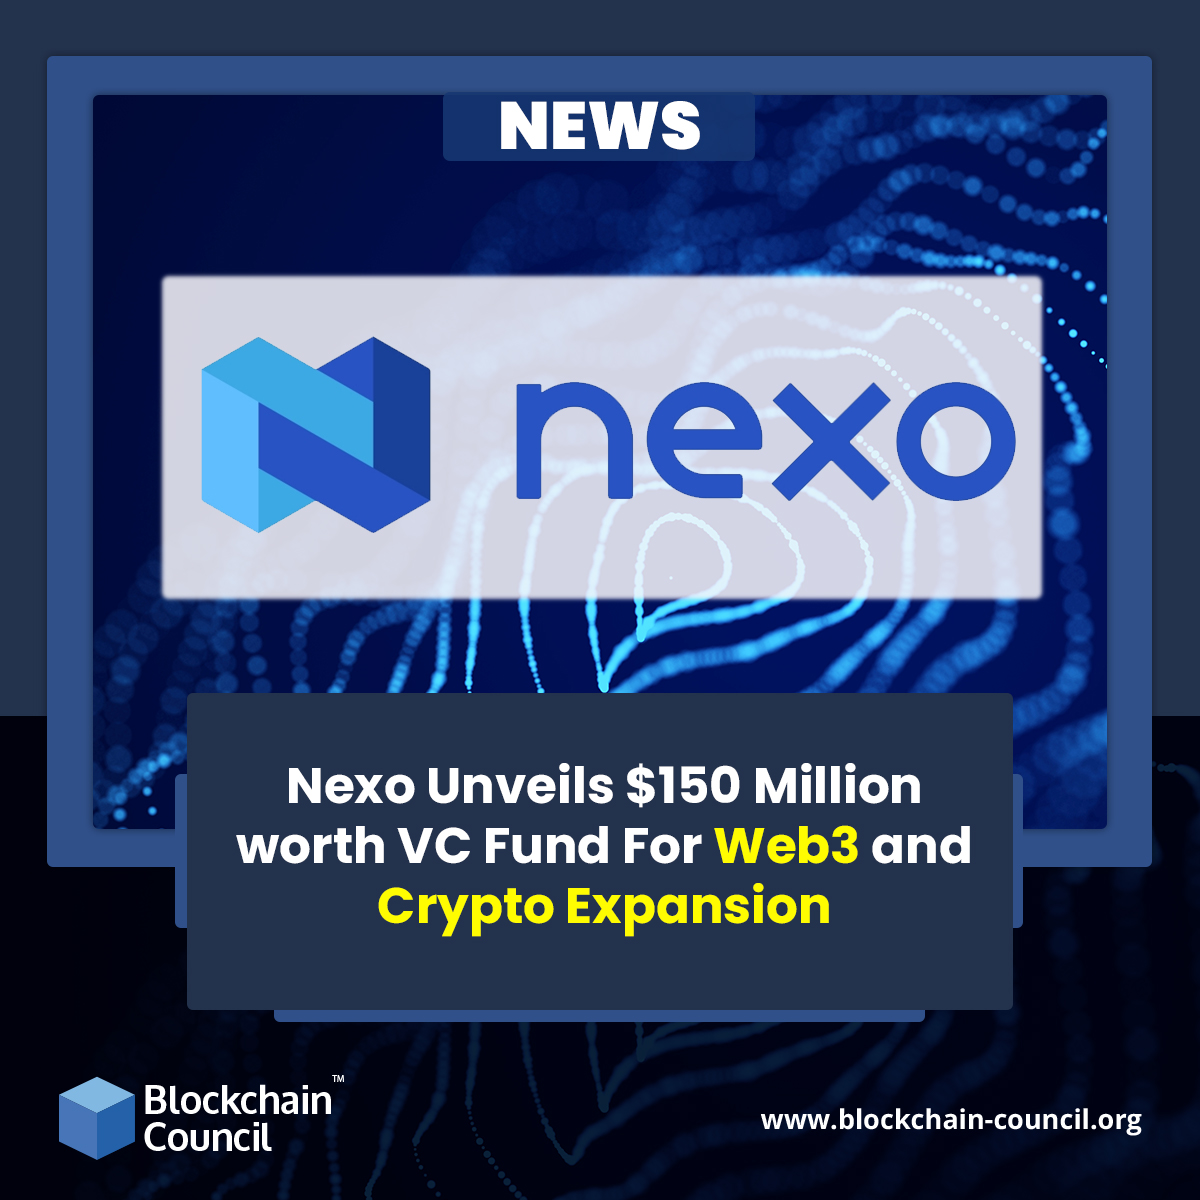 Nexo Unveils $150 Million worth VC Fund For Web3 and Crypto Expansion